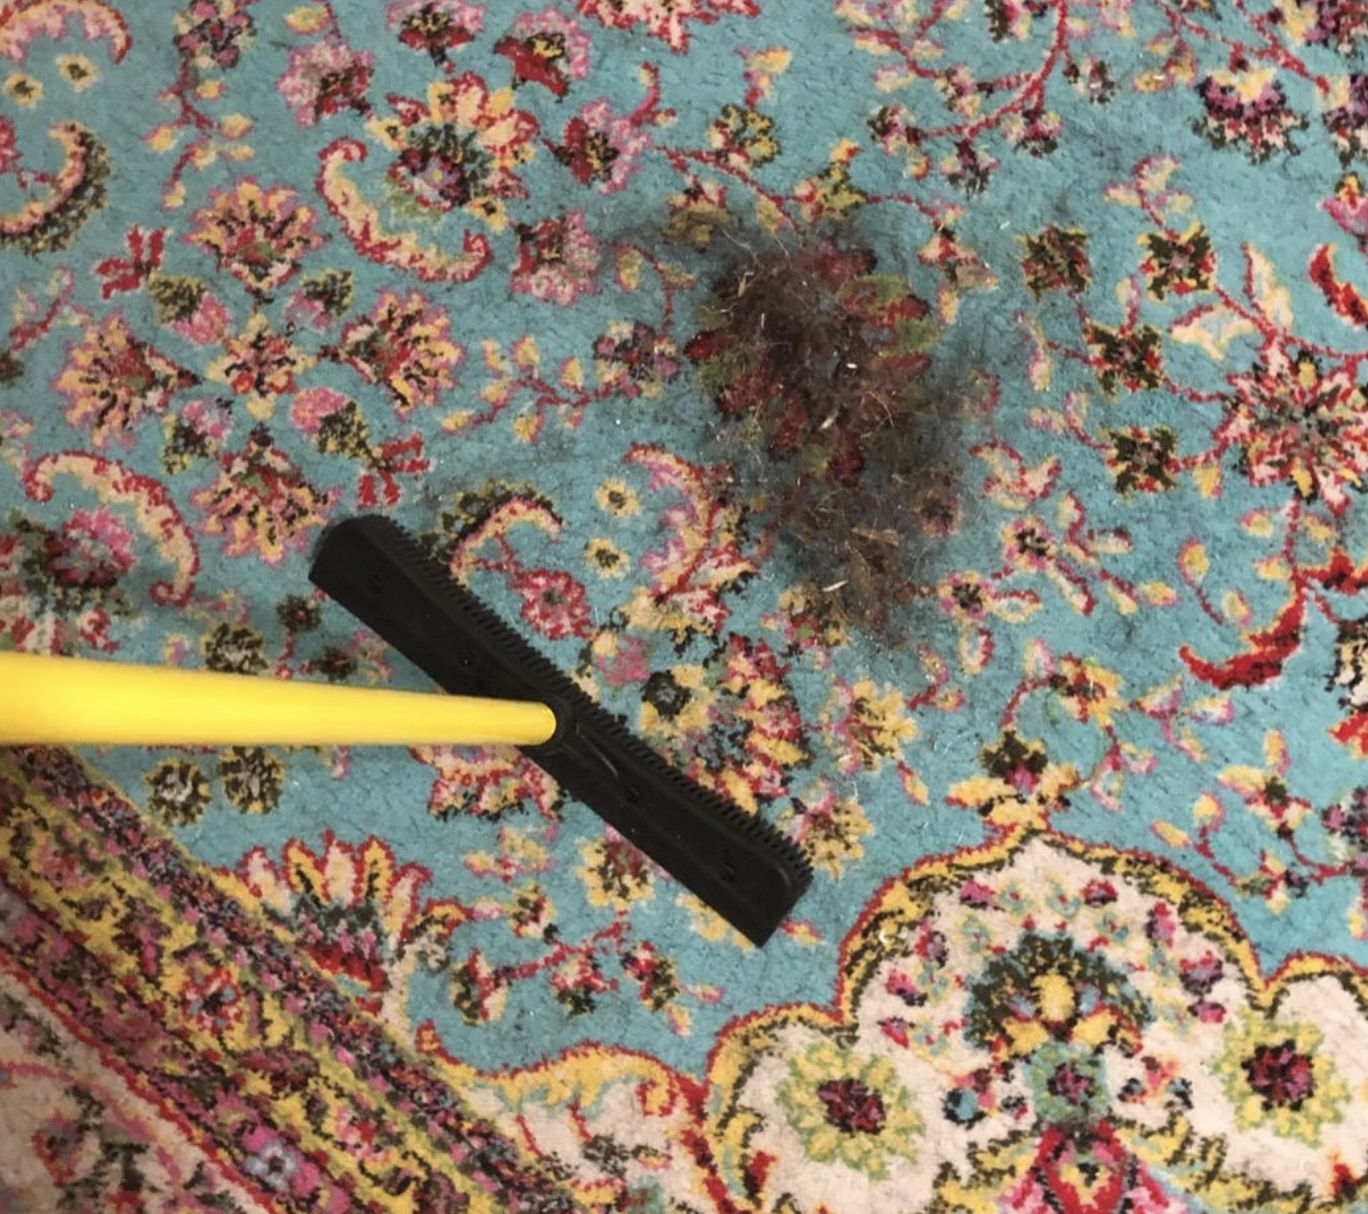 reviewer photo of the broom being used to clean up pet hair